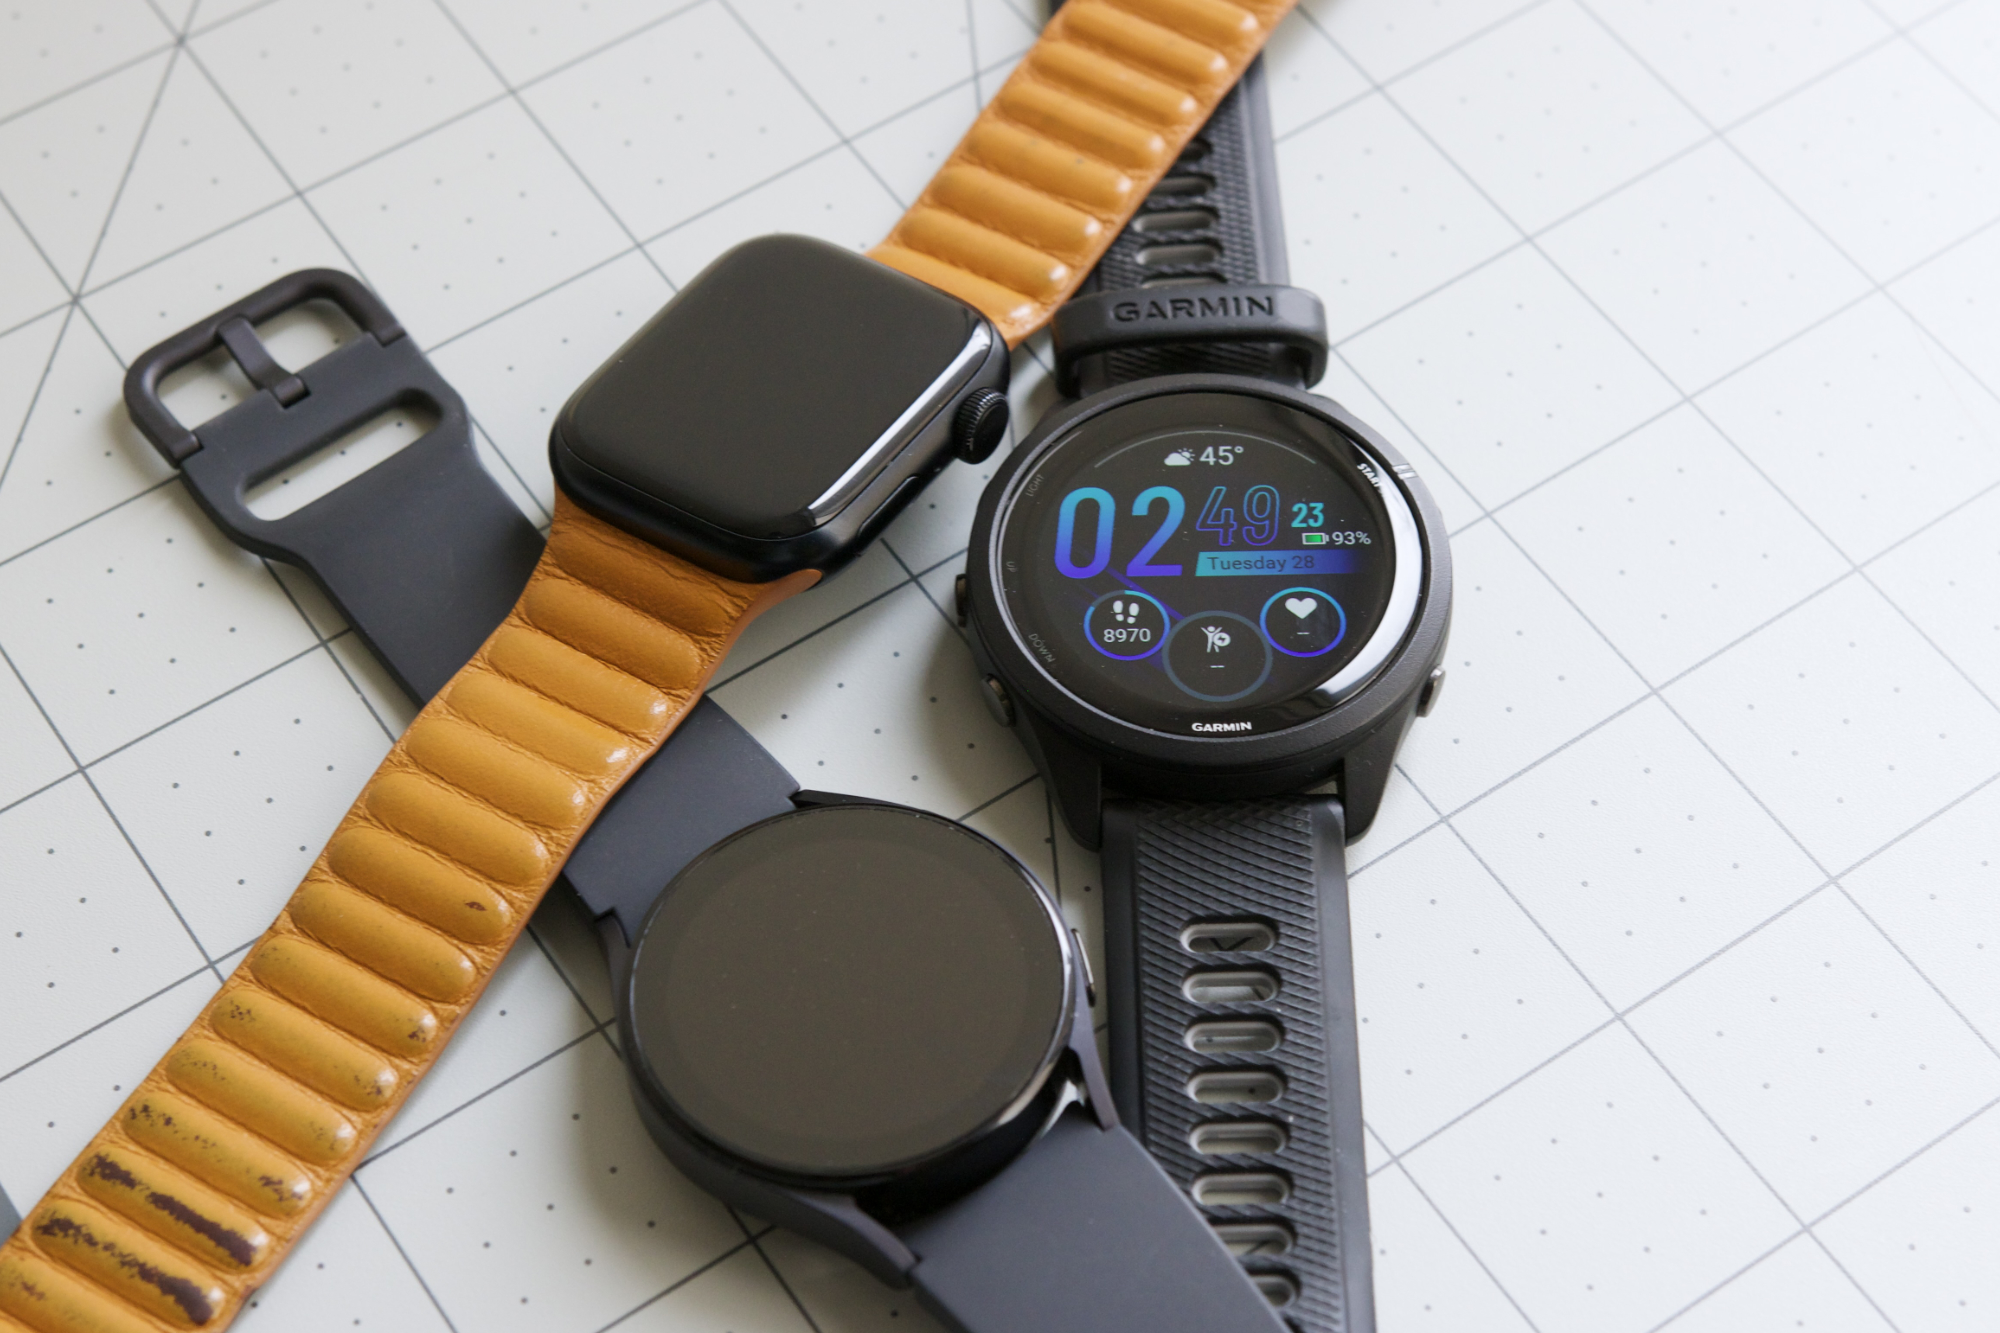 Wear Os Watches 2024